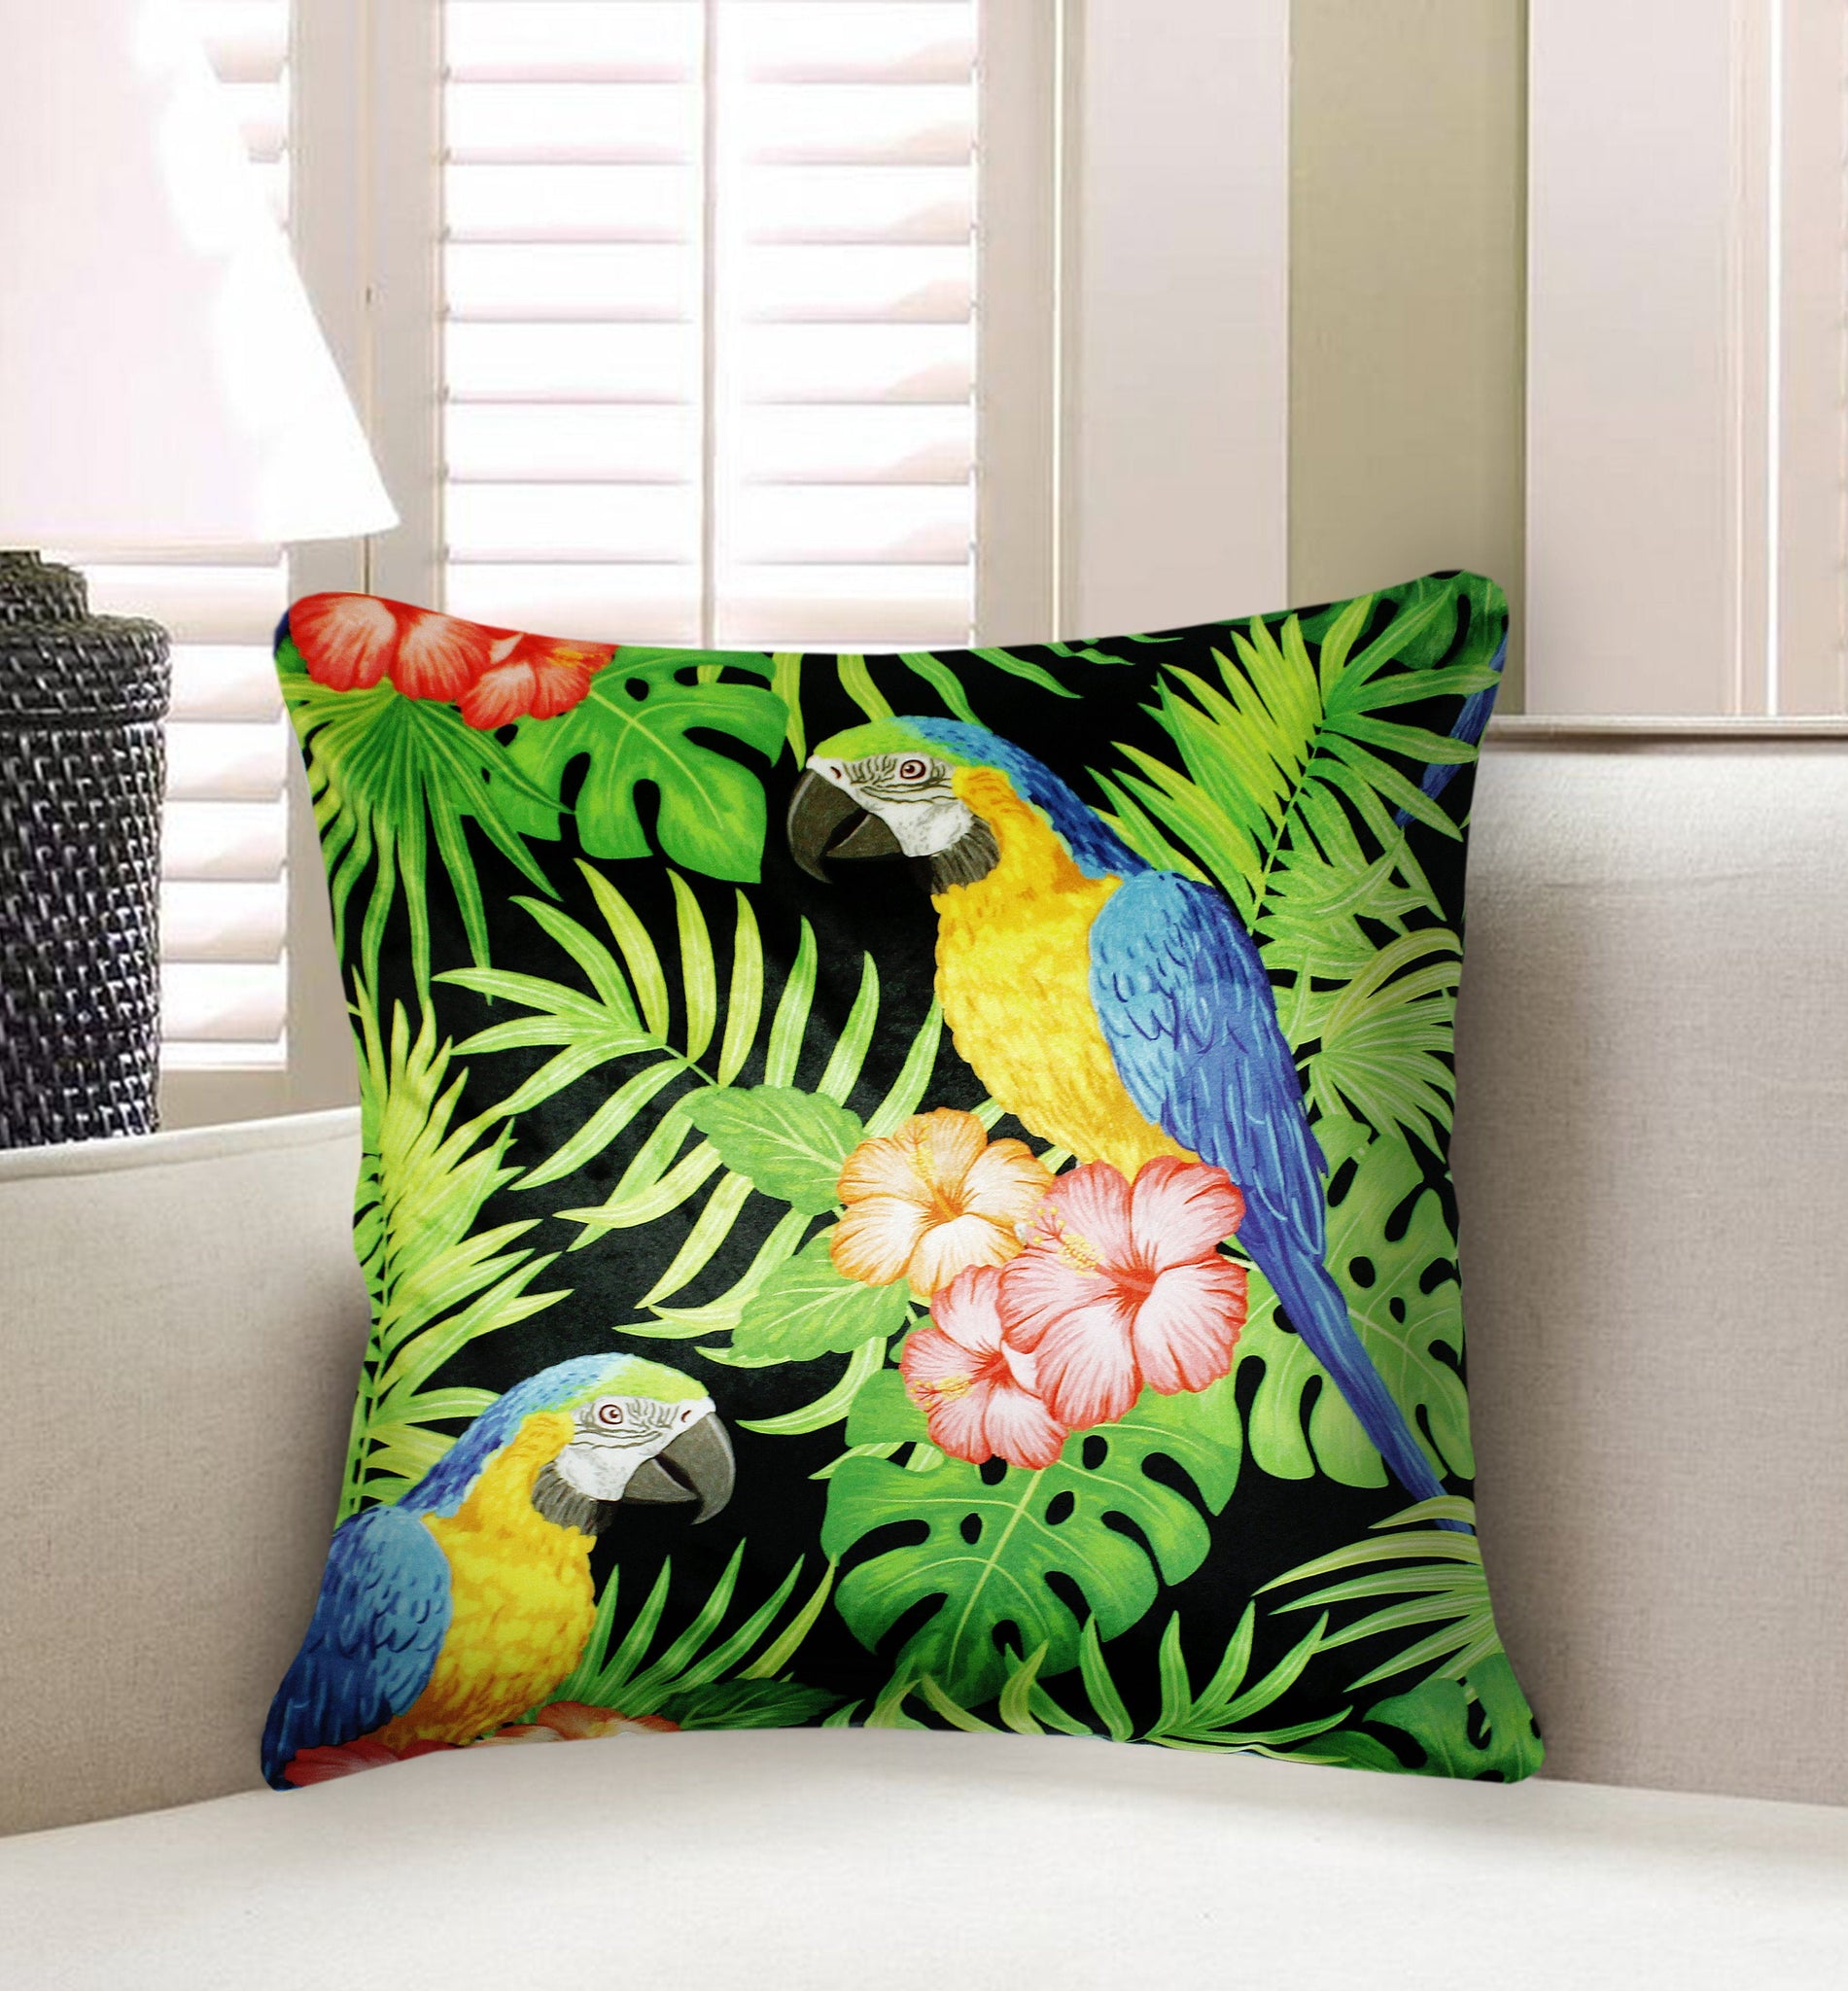 Green Velvet Cushion Cover Parrot and Jungle Decorative Pillowcase Home Decor Throw Pillow for Sofa Chair Living Room 45x45 cm 18x18 In